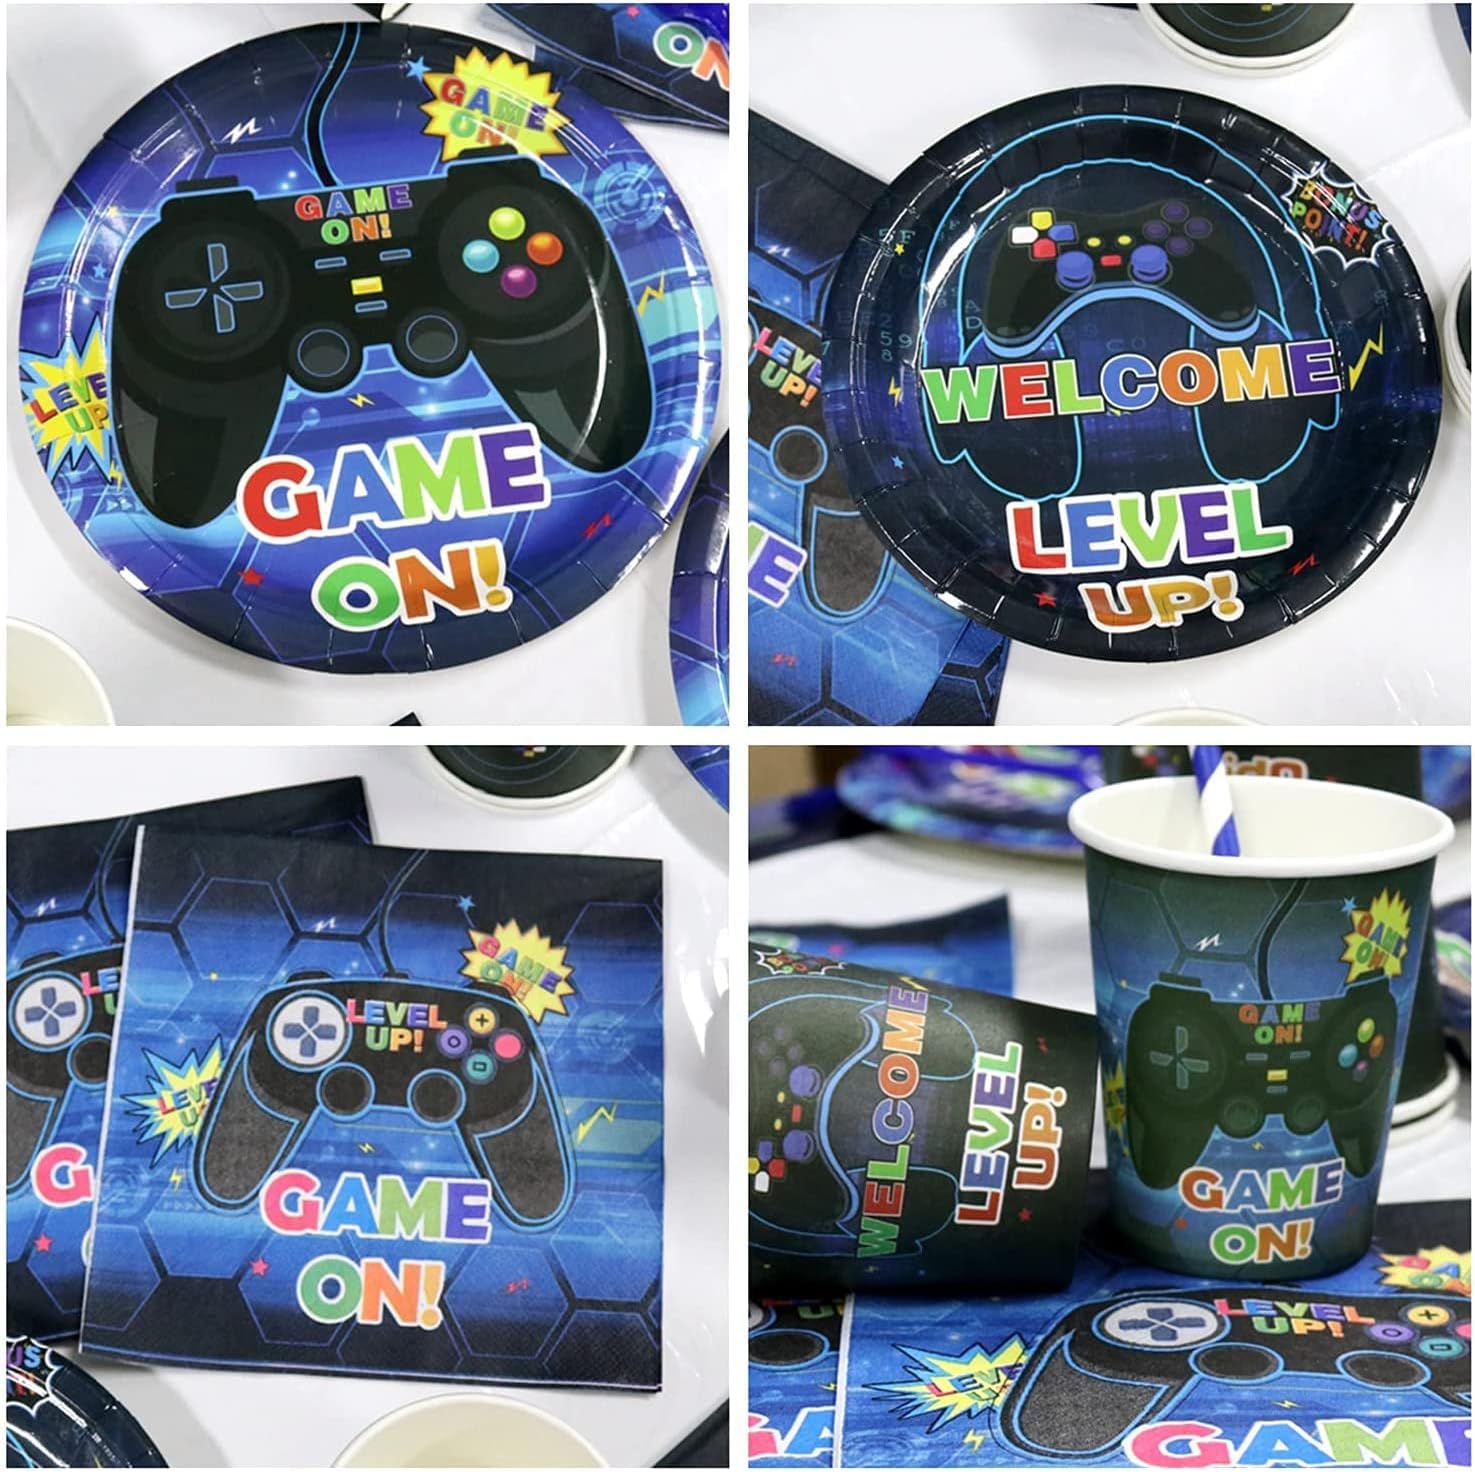 Hegbolke Video Game Party Supplies Review